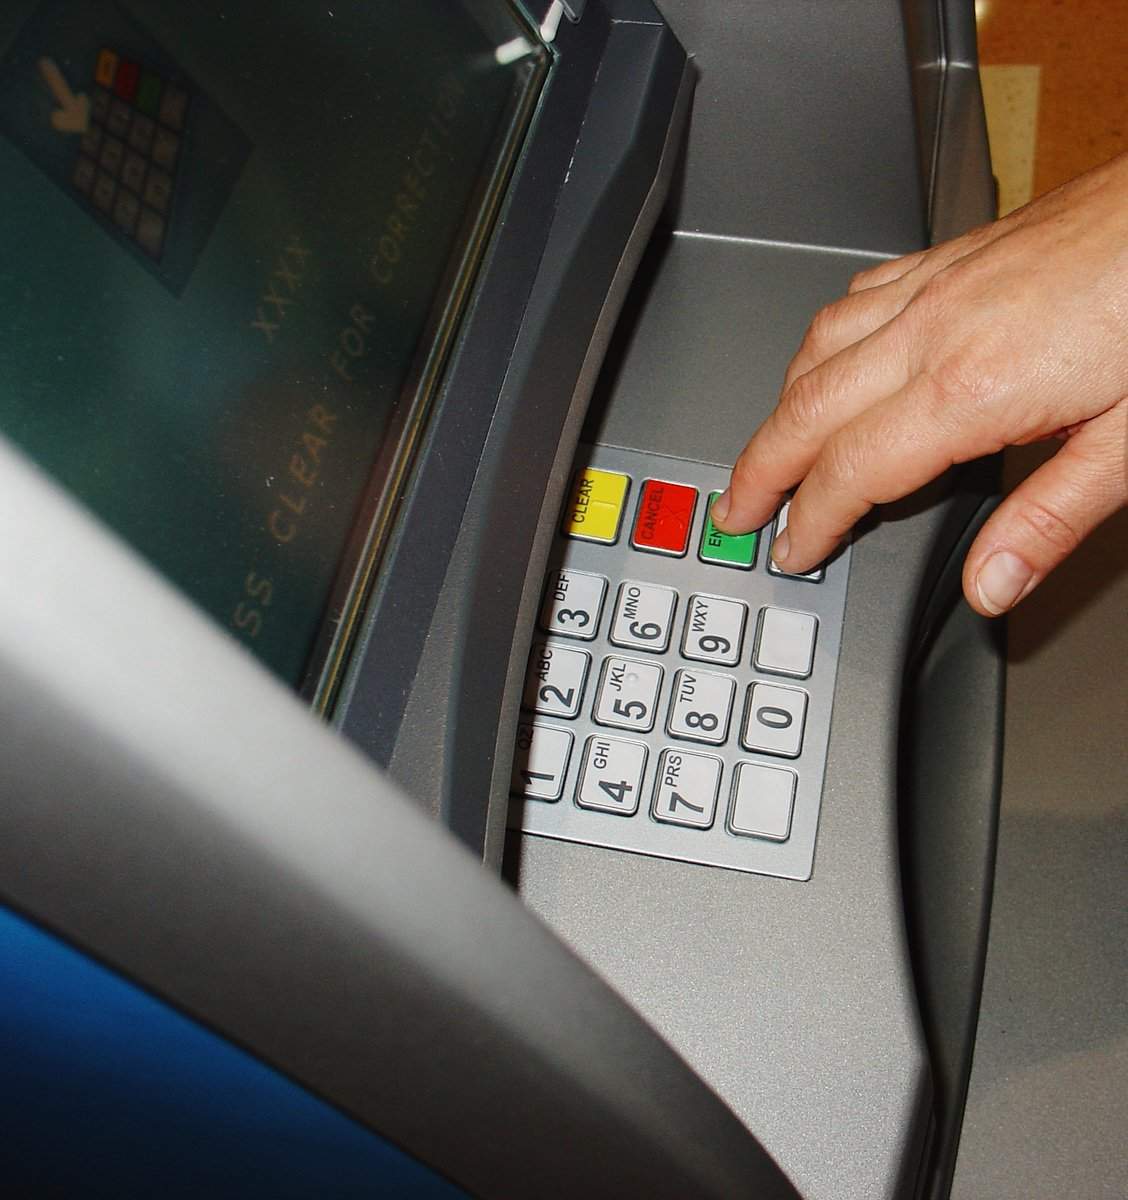 Euronet to acquire 167 ATMs in Poland from Aplitt Spolka